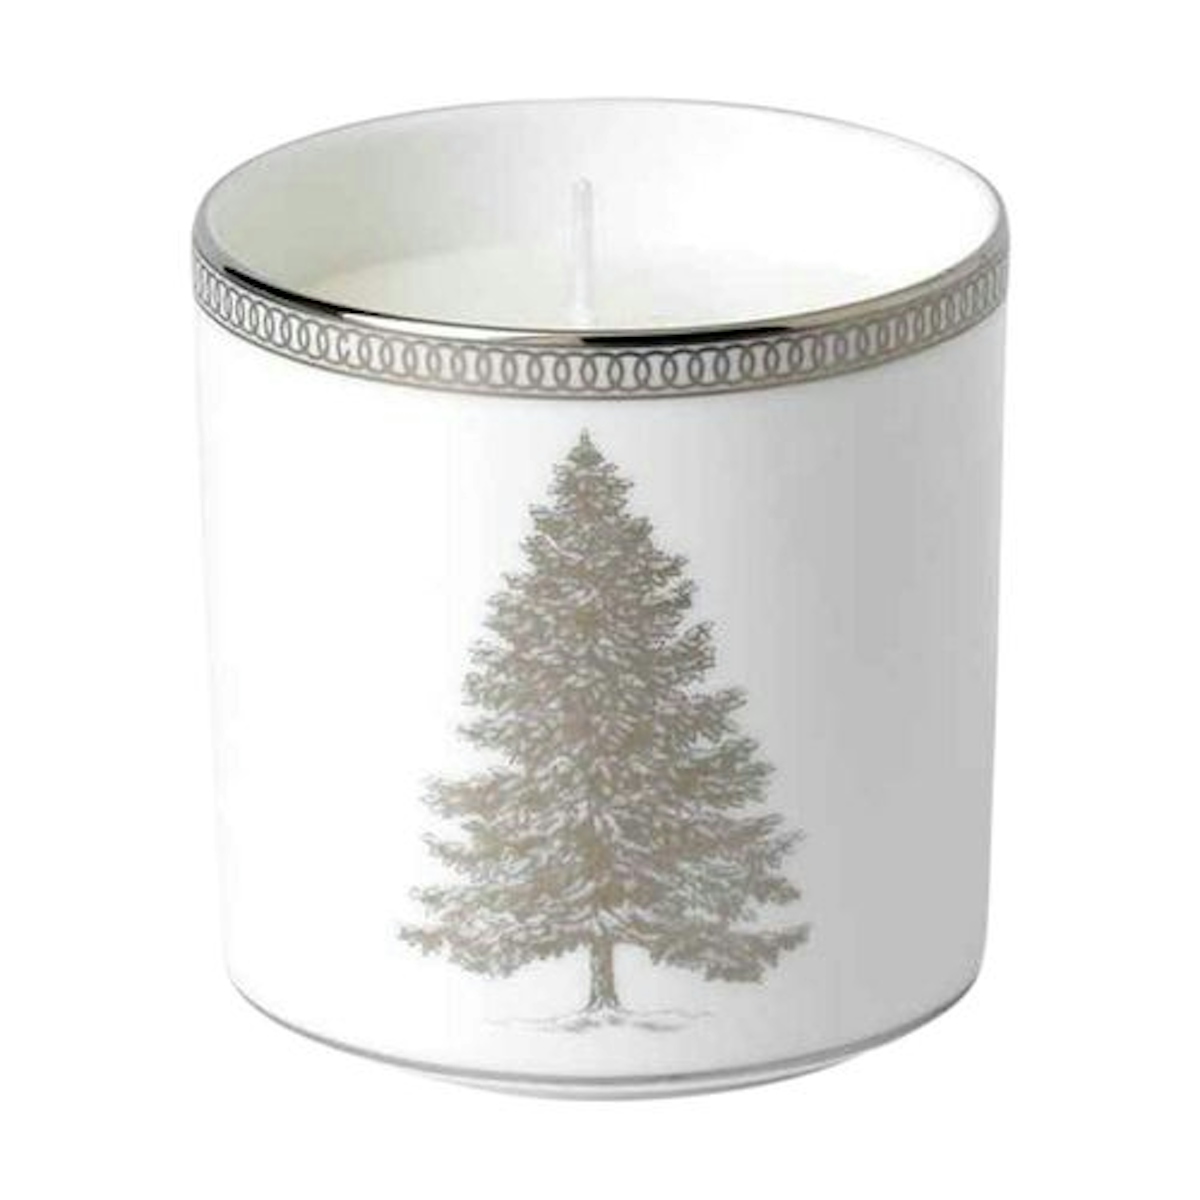 Winter White Filled Candle - 12 Best Scented Candles & Fragrances For Your Home - Style Guide - LuxDeco.com